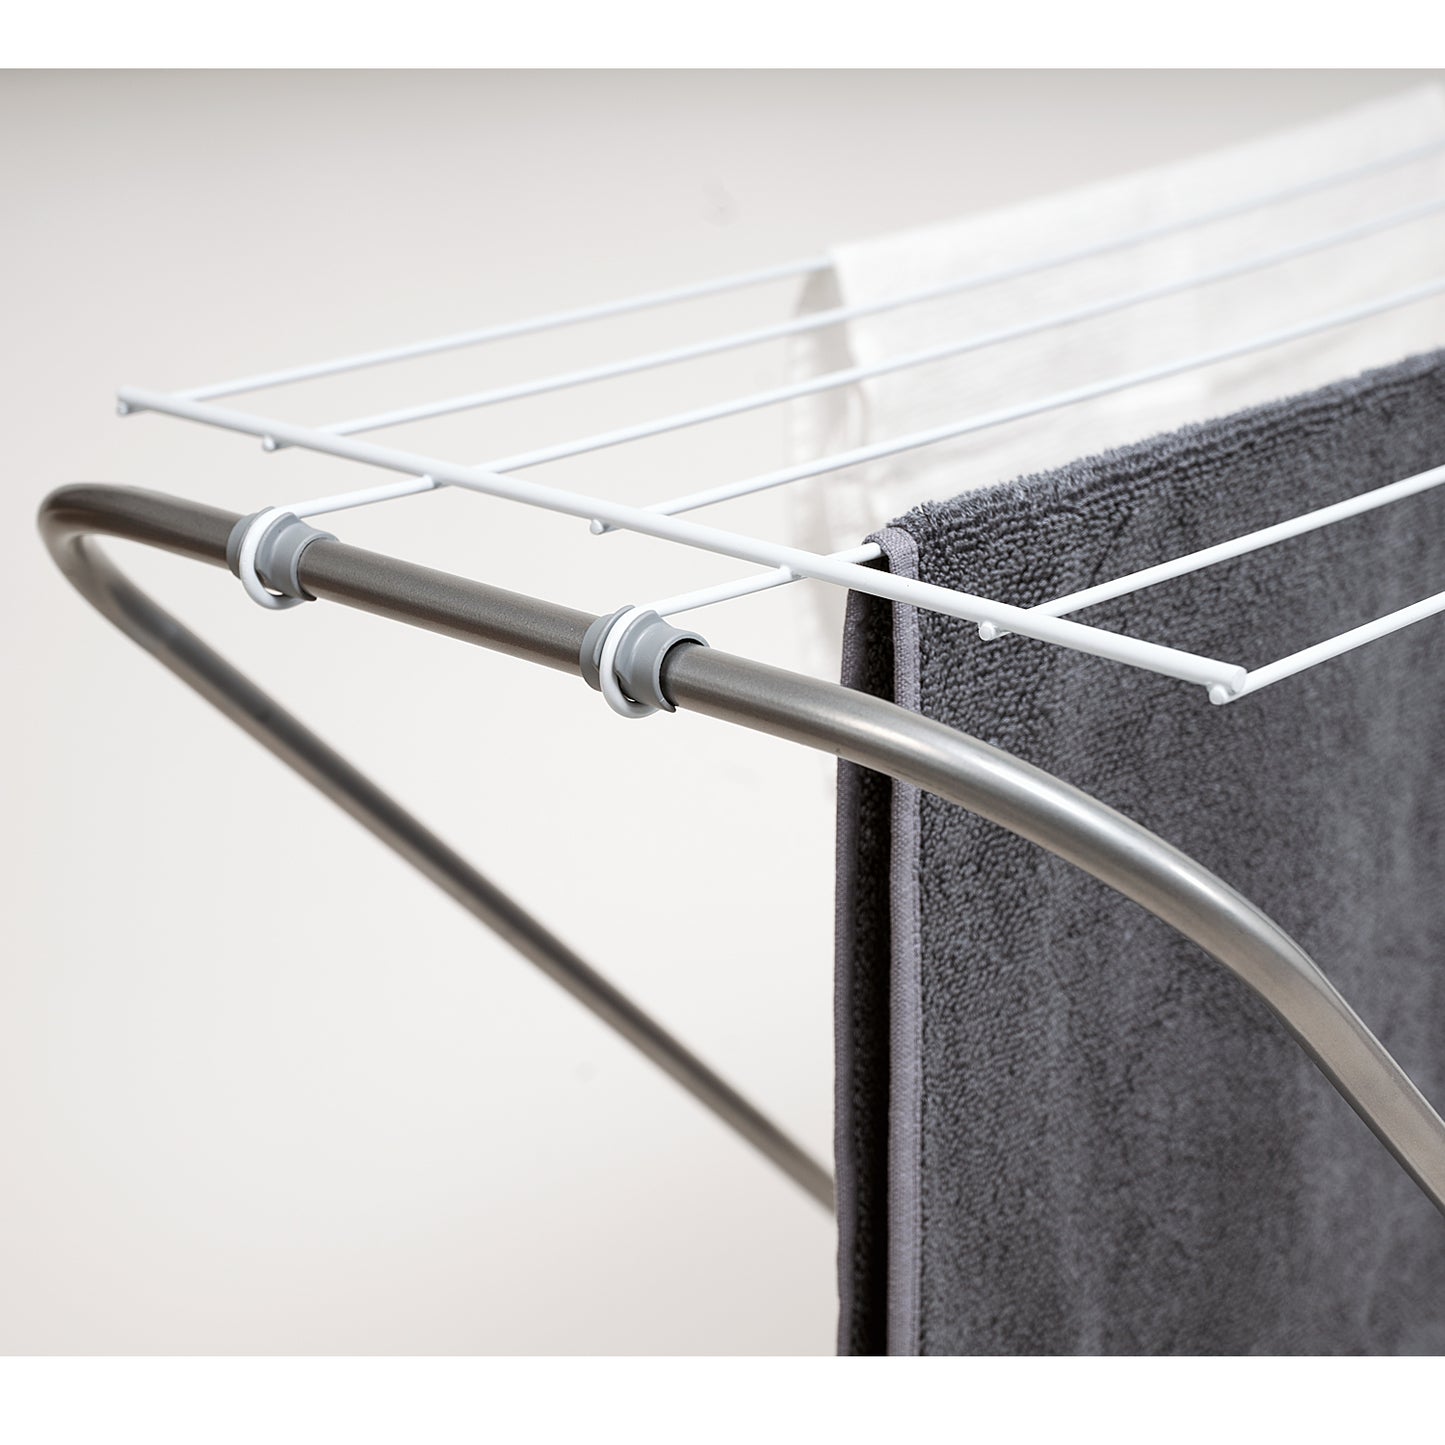 dable Freestanding Clothes Drying Rack, Made in Italy, Tatkraft Toro, 3